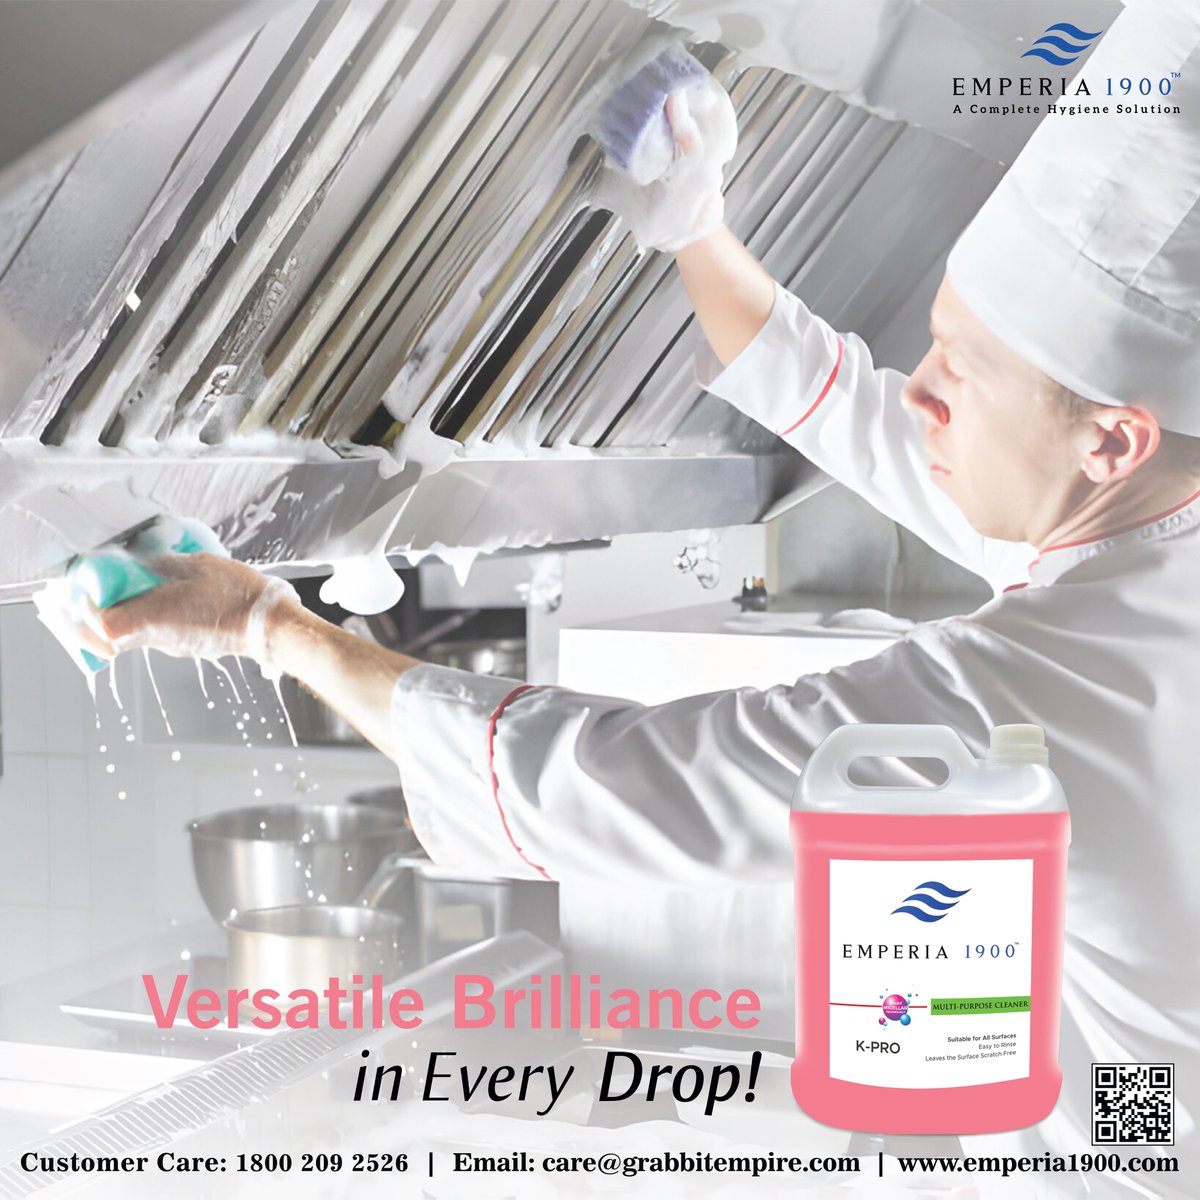 Transform your kitchen cleaning routine with our versatile @EMPERIA1900 K-Pro Multi-Purpose Cleaner, catering to all your kitchen needs.

✅Suitable for All Surfaces
✅Easy to Rinse
✅Leaves Surfaces Scratch-Free

#hygienesolutions #hygiene #hygieneproducts  #cleaning #cleaners